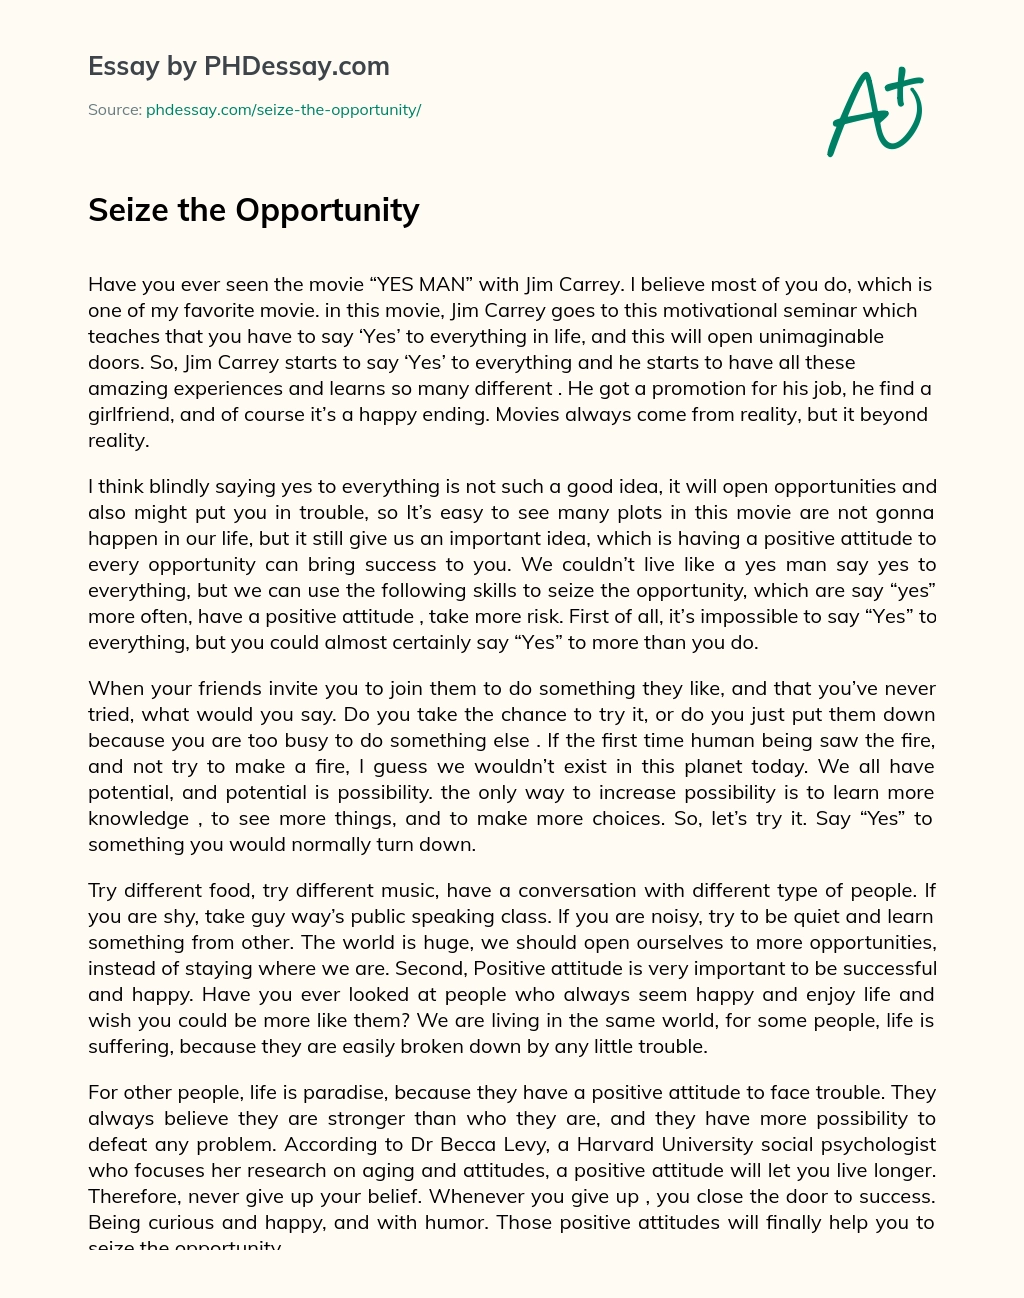 Seize the Opportunity essay